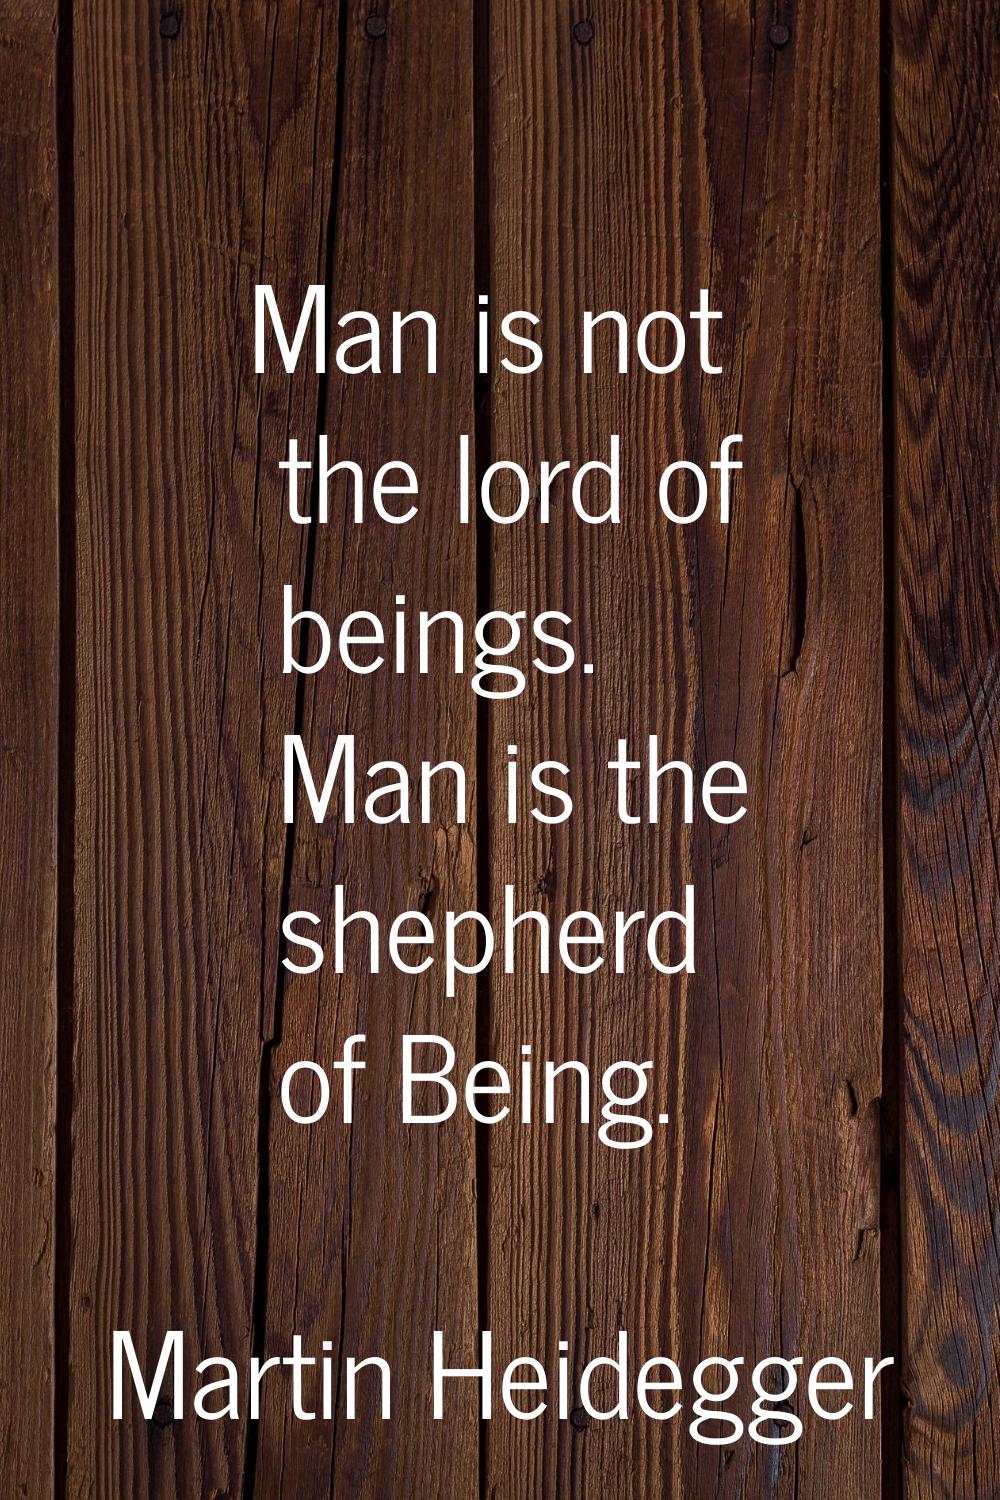 Man is not the lord of beings. Man is the shepherd of Being.